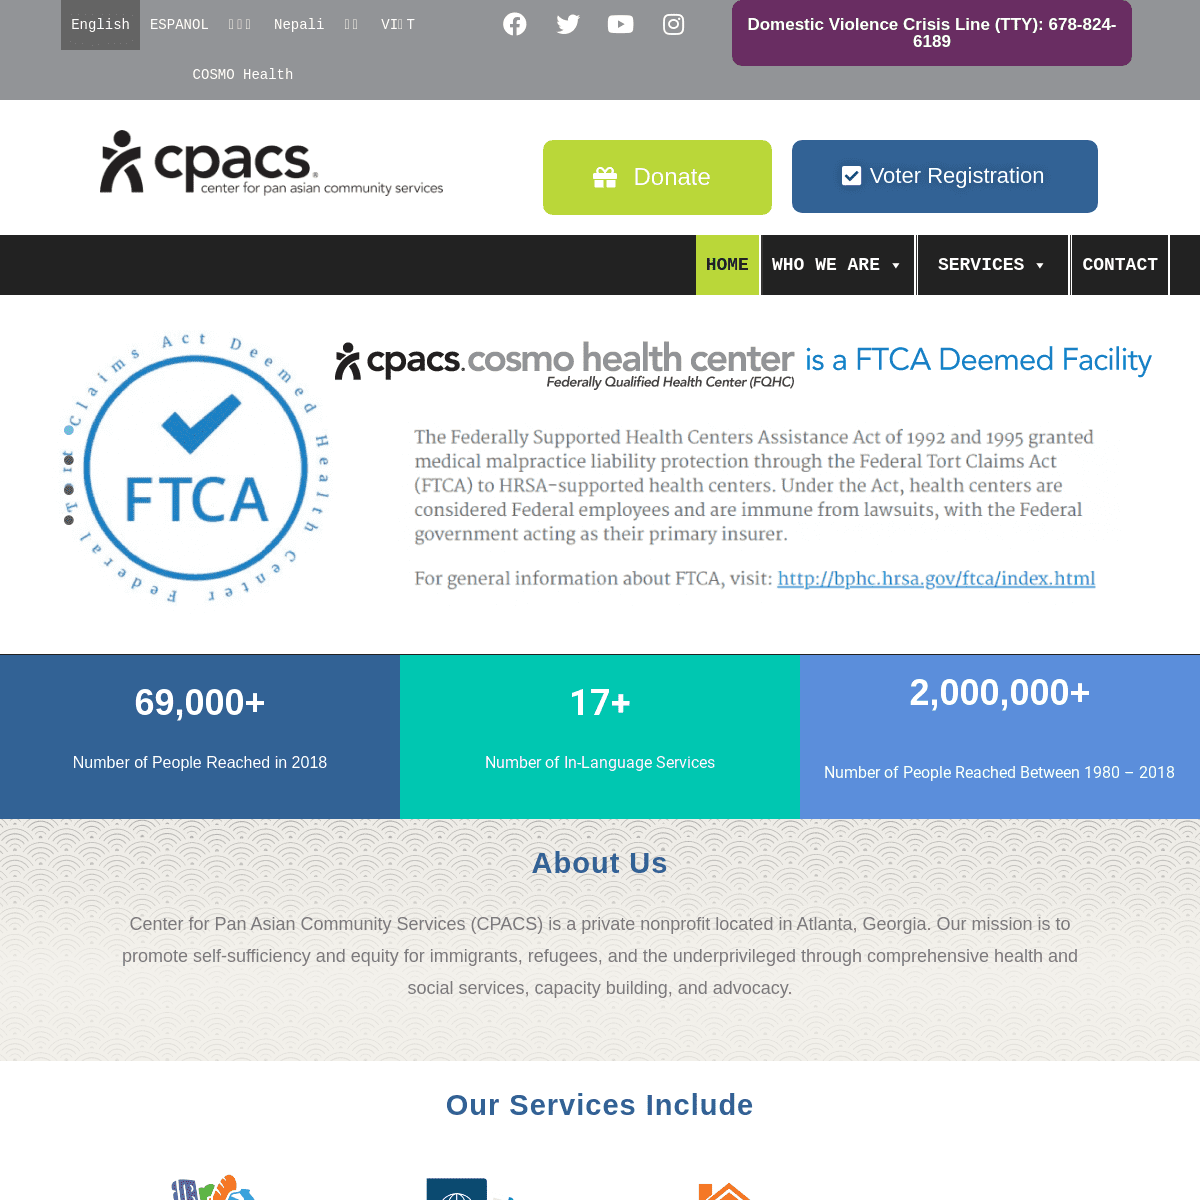 A complete backup of https://cpacs.org